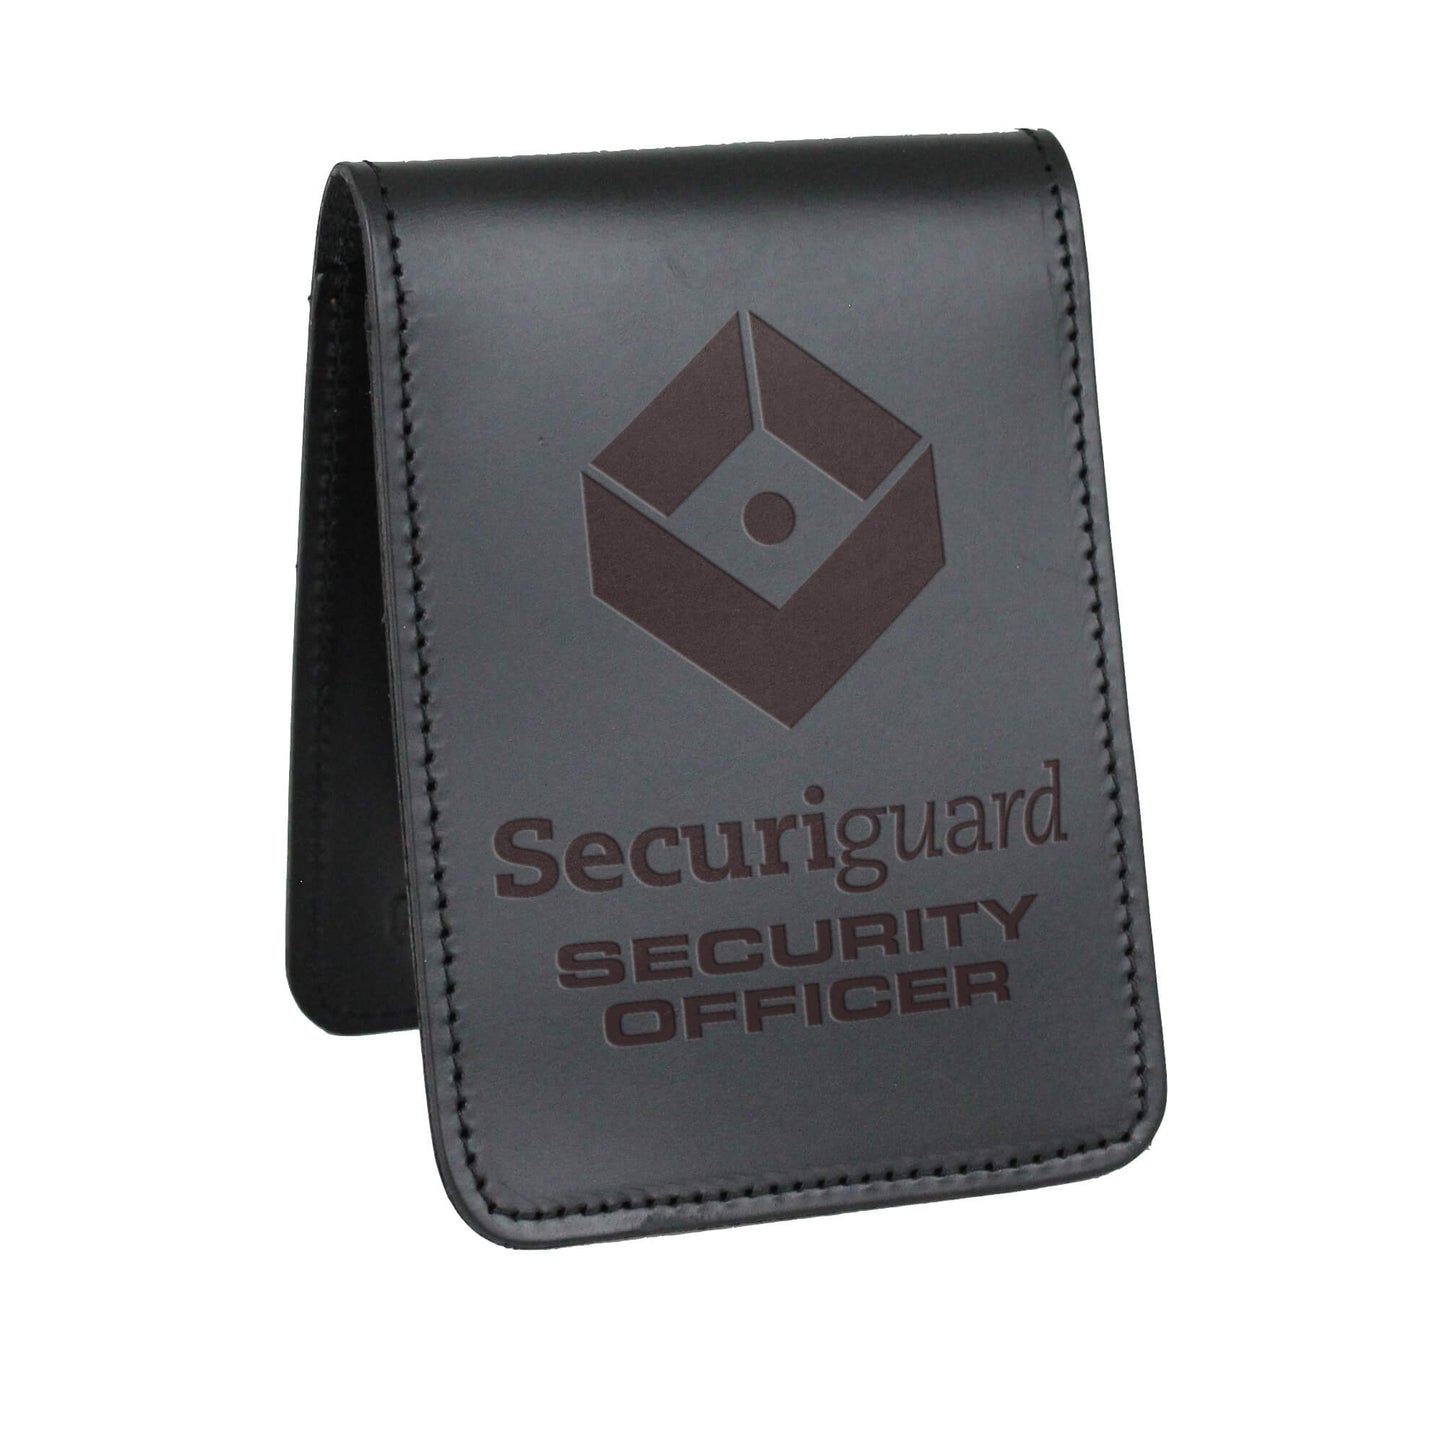 Securiguard Security Notebook Cover